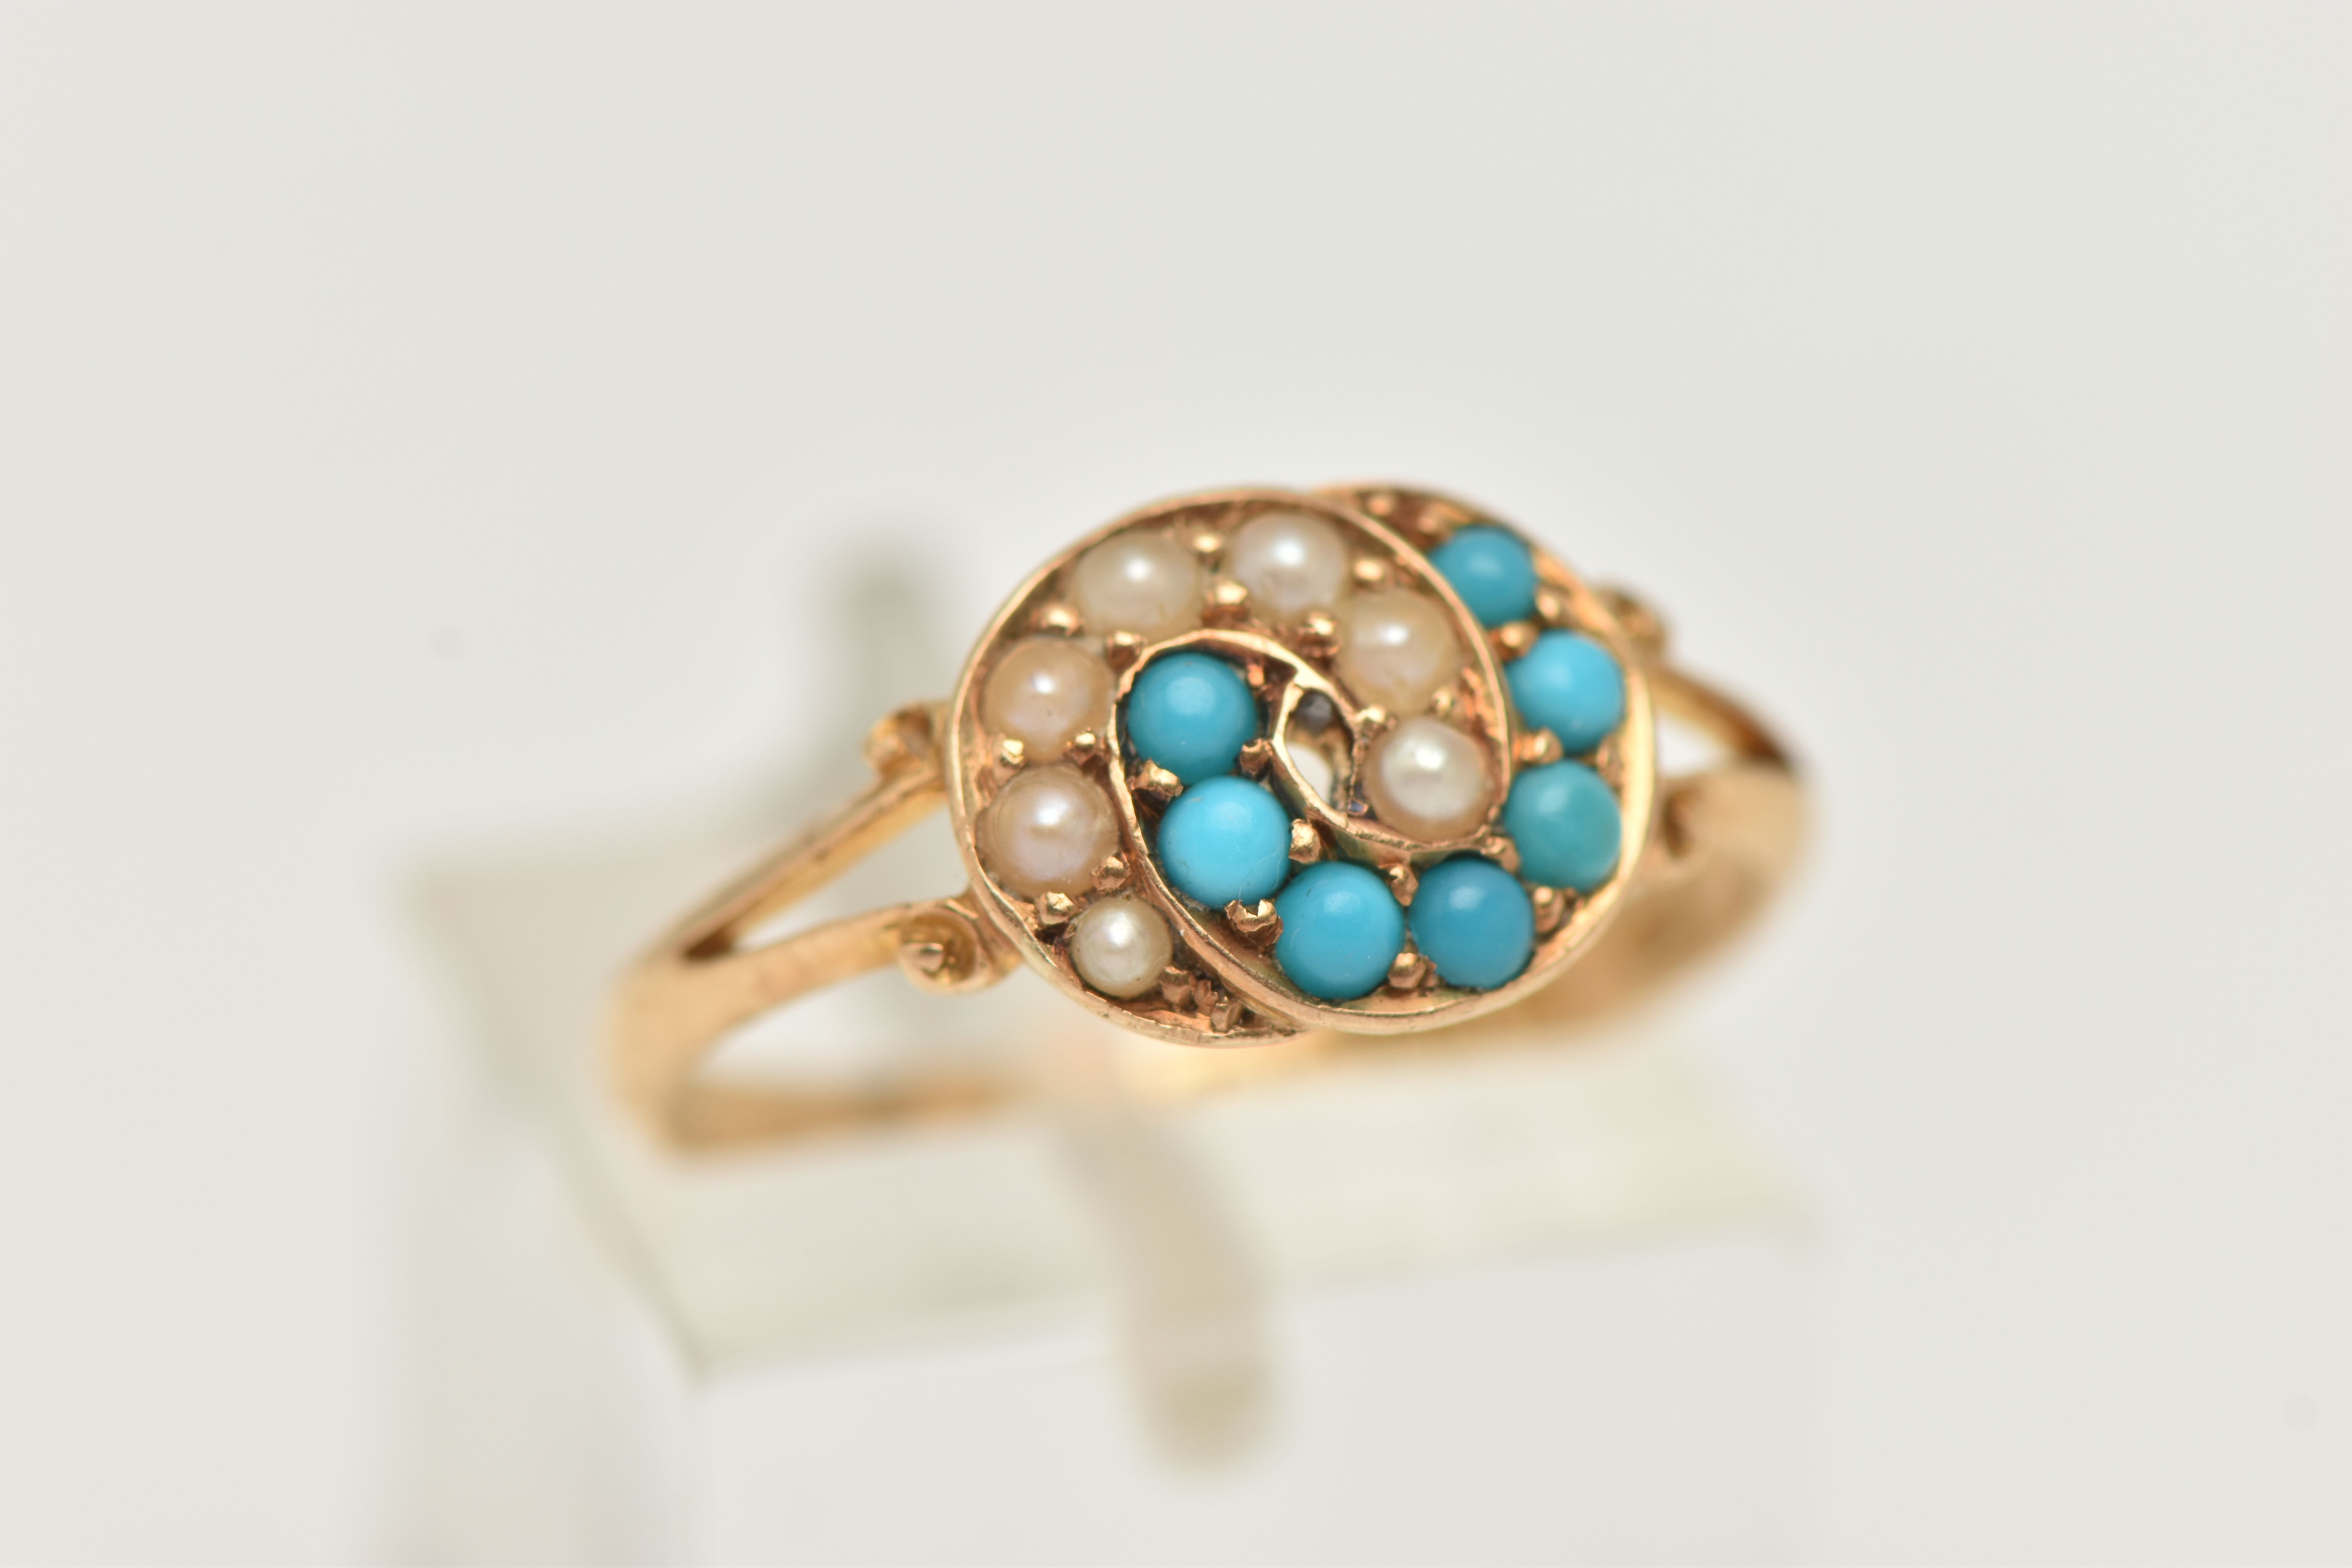 AN 18CT GOLD, EARLY 20TH CENTURY SPLIT PEARL AND TURQUOISE RING, interlocking ring head set with a - Image 4 of 4